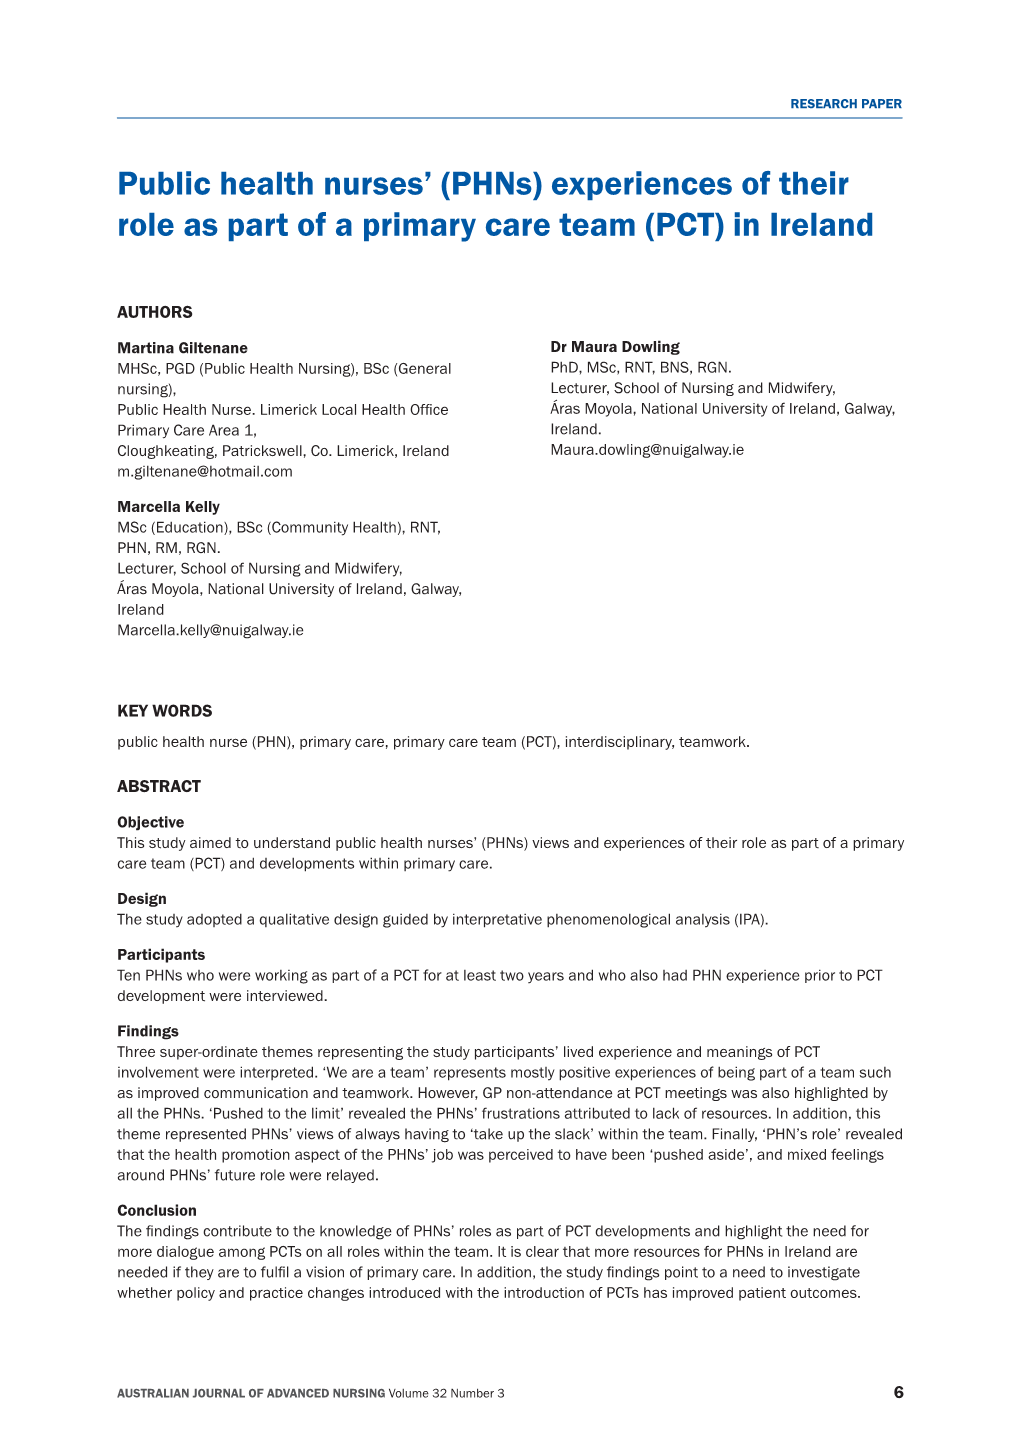 Public Health Nurses’ (Phns) Experiences of Their Role As Part of a Primary Care Team (PCT) in Ireland